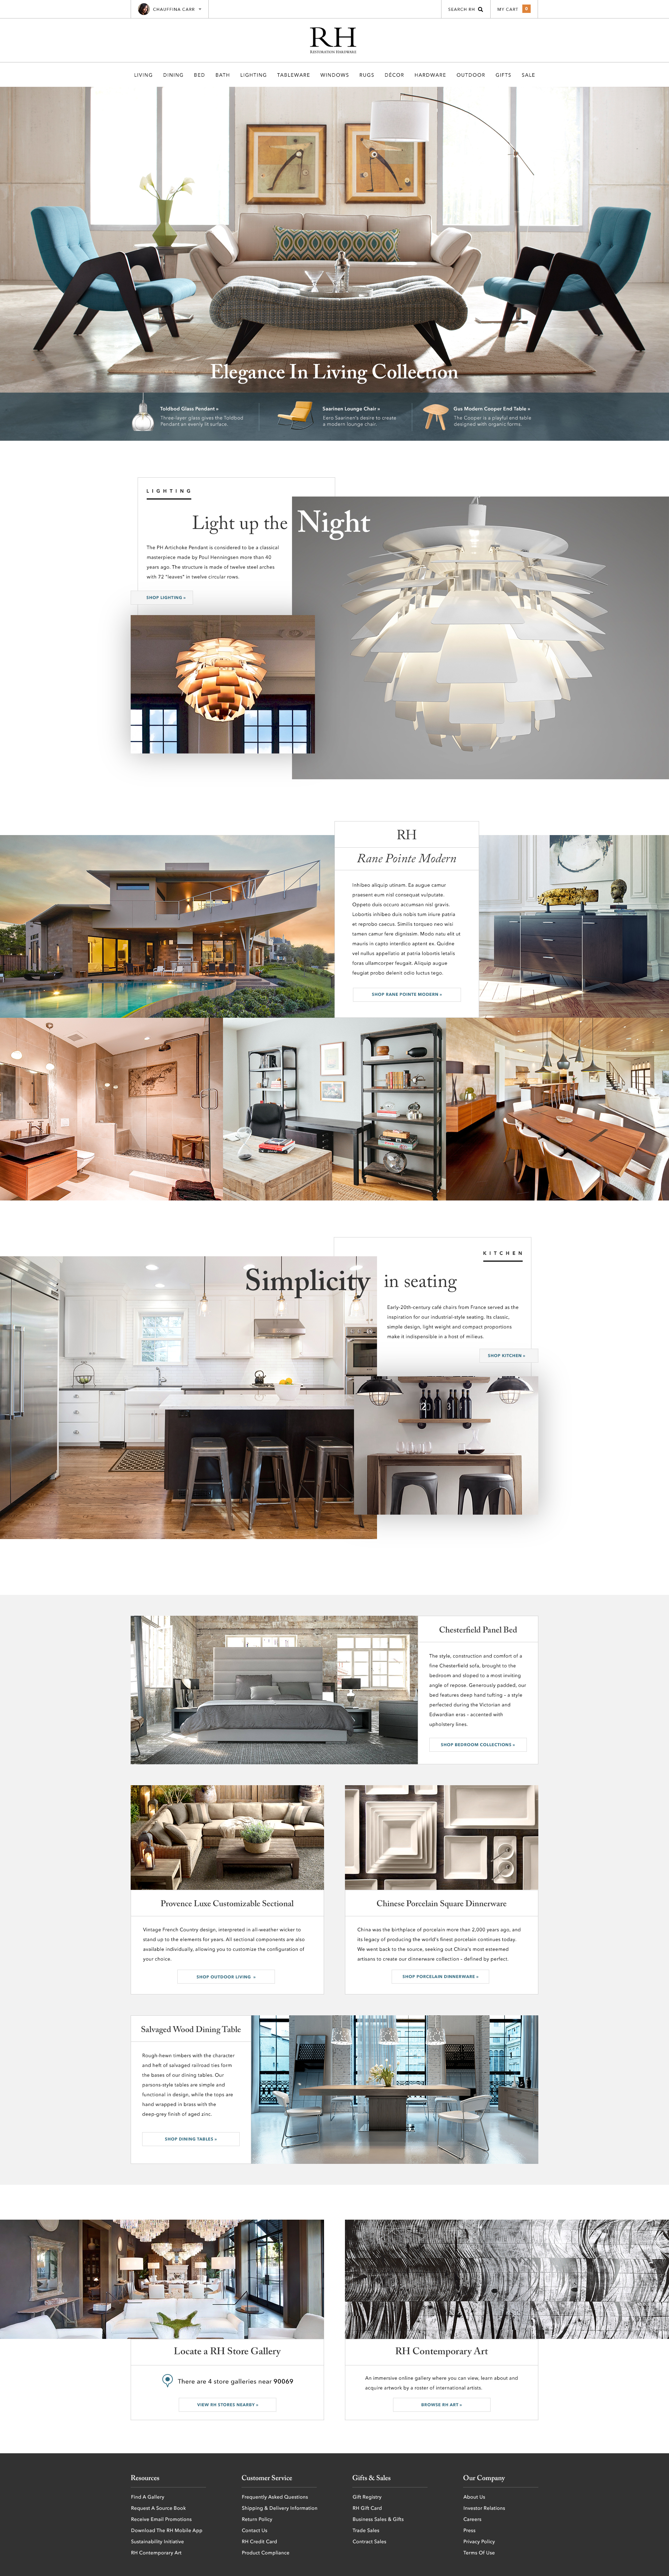 Restoration Hardware homepage redesign by Jason Kirtley on Dribbble